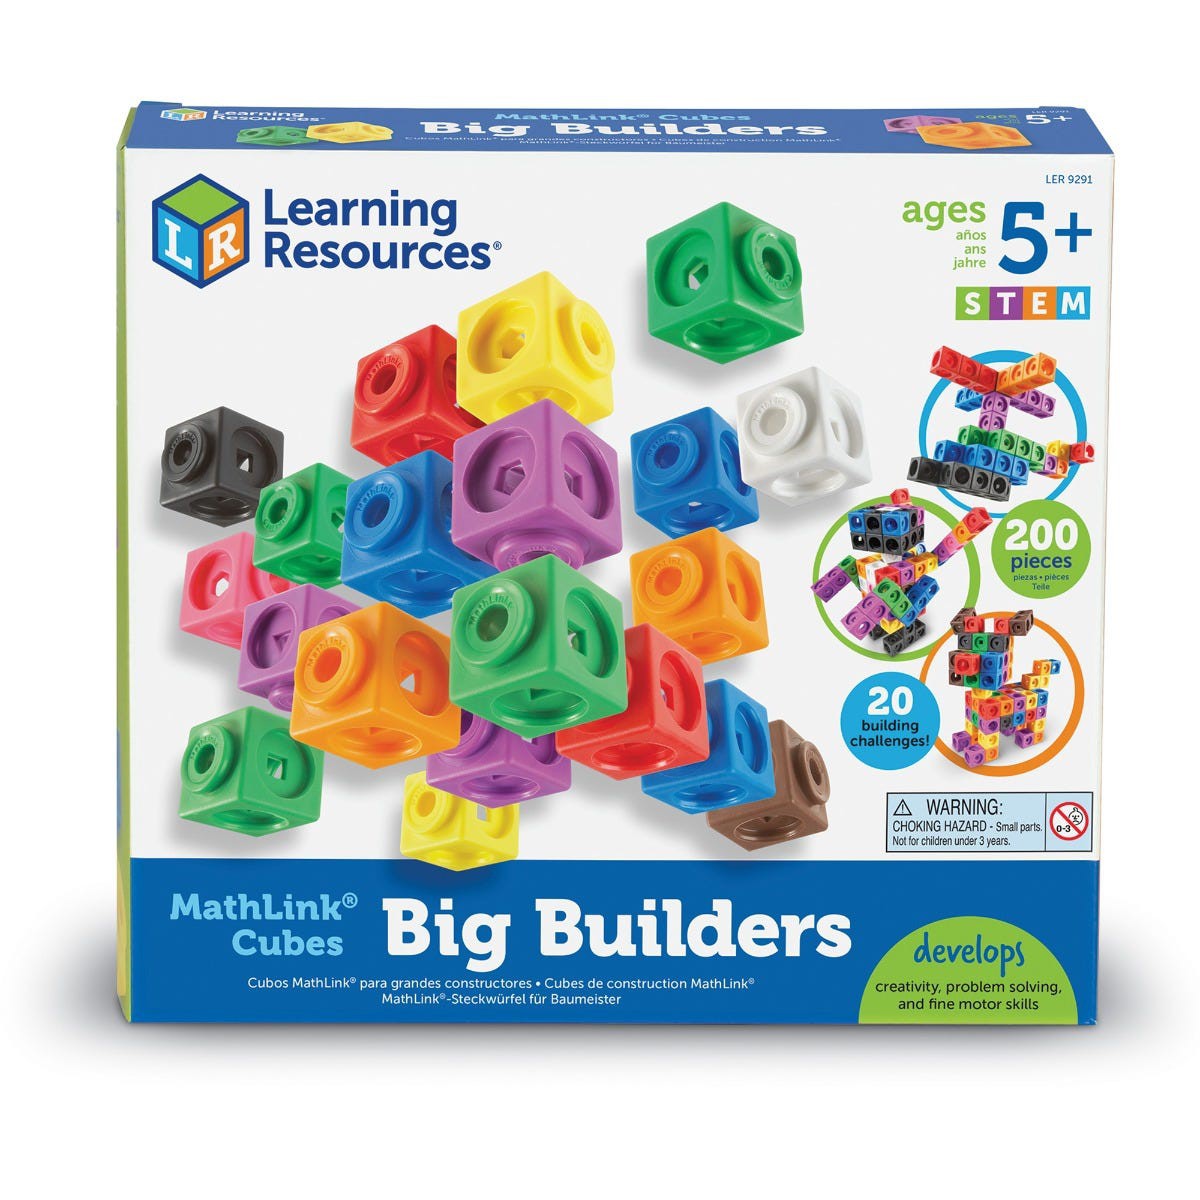 MathLink® Cubes Big Builders Learning Resources